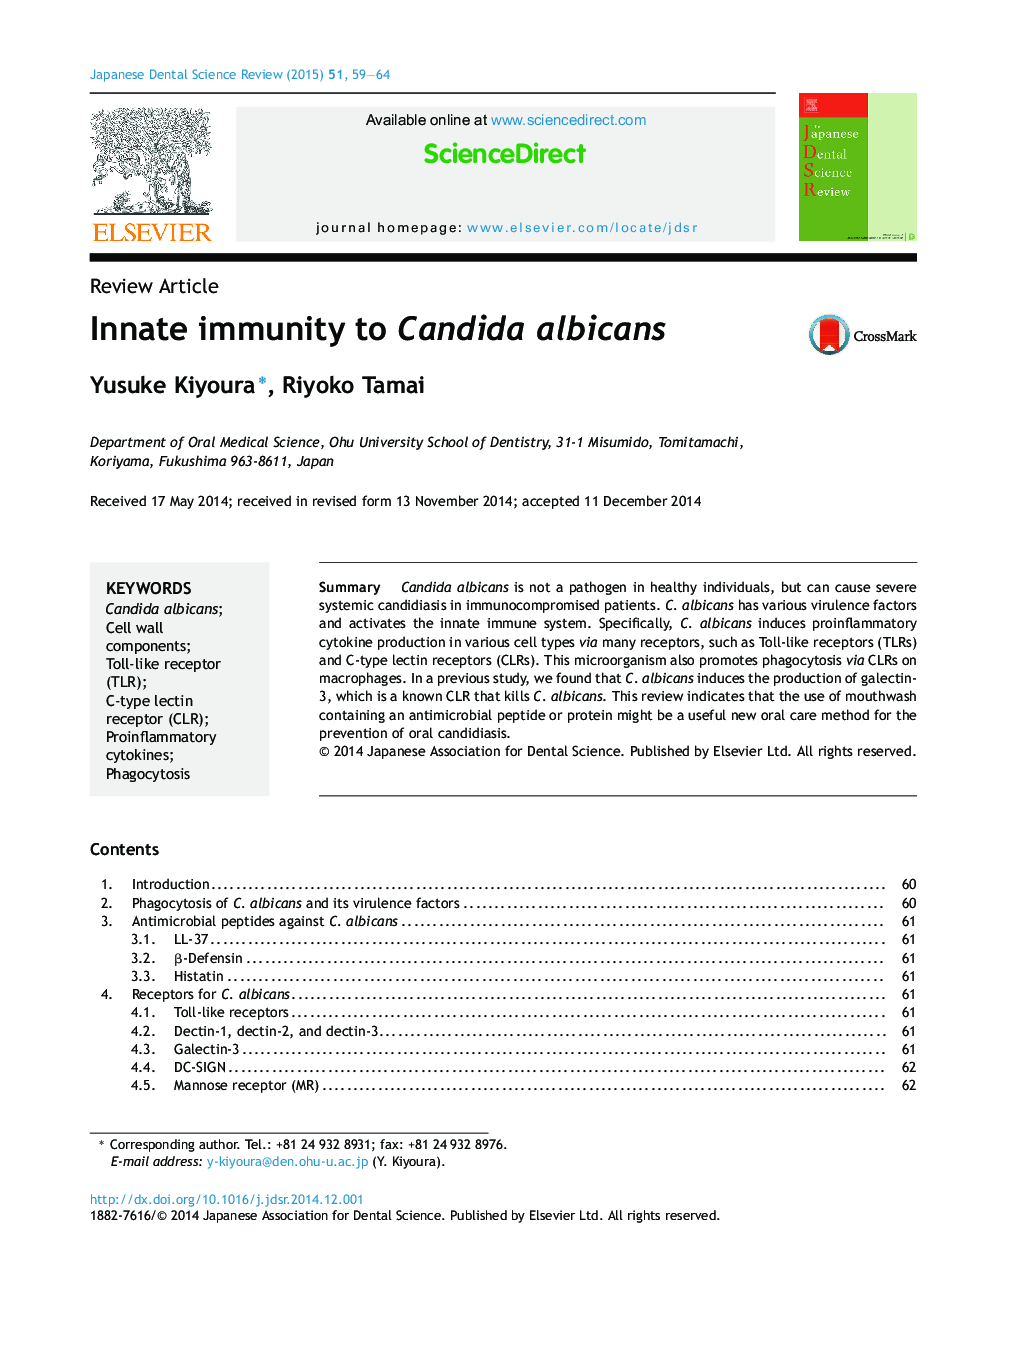 Innate immunity to Candida albicans